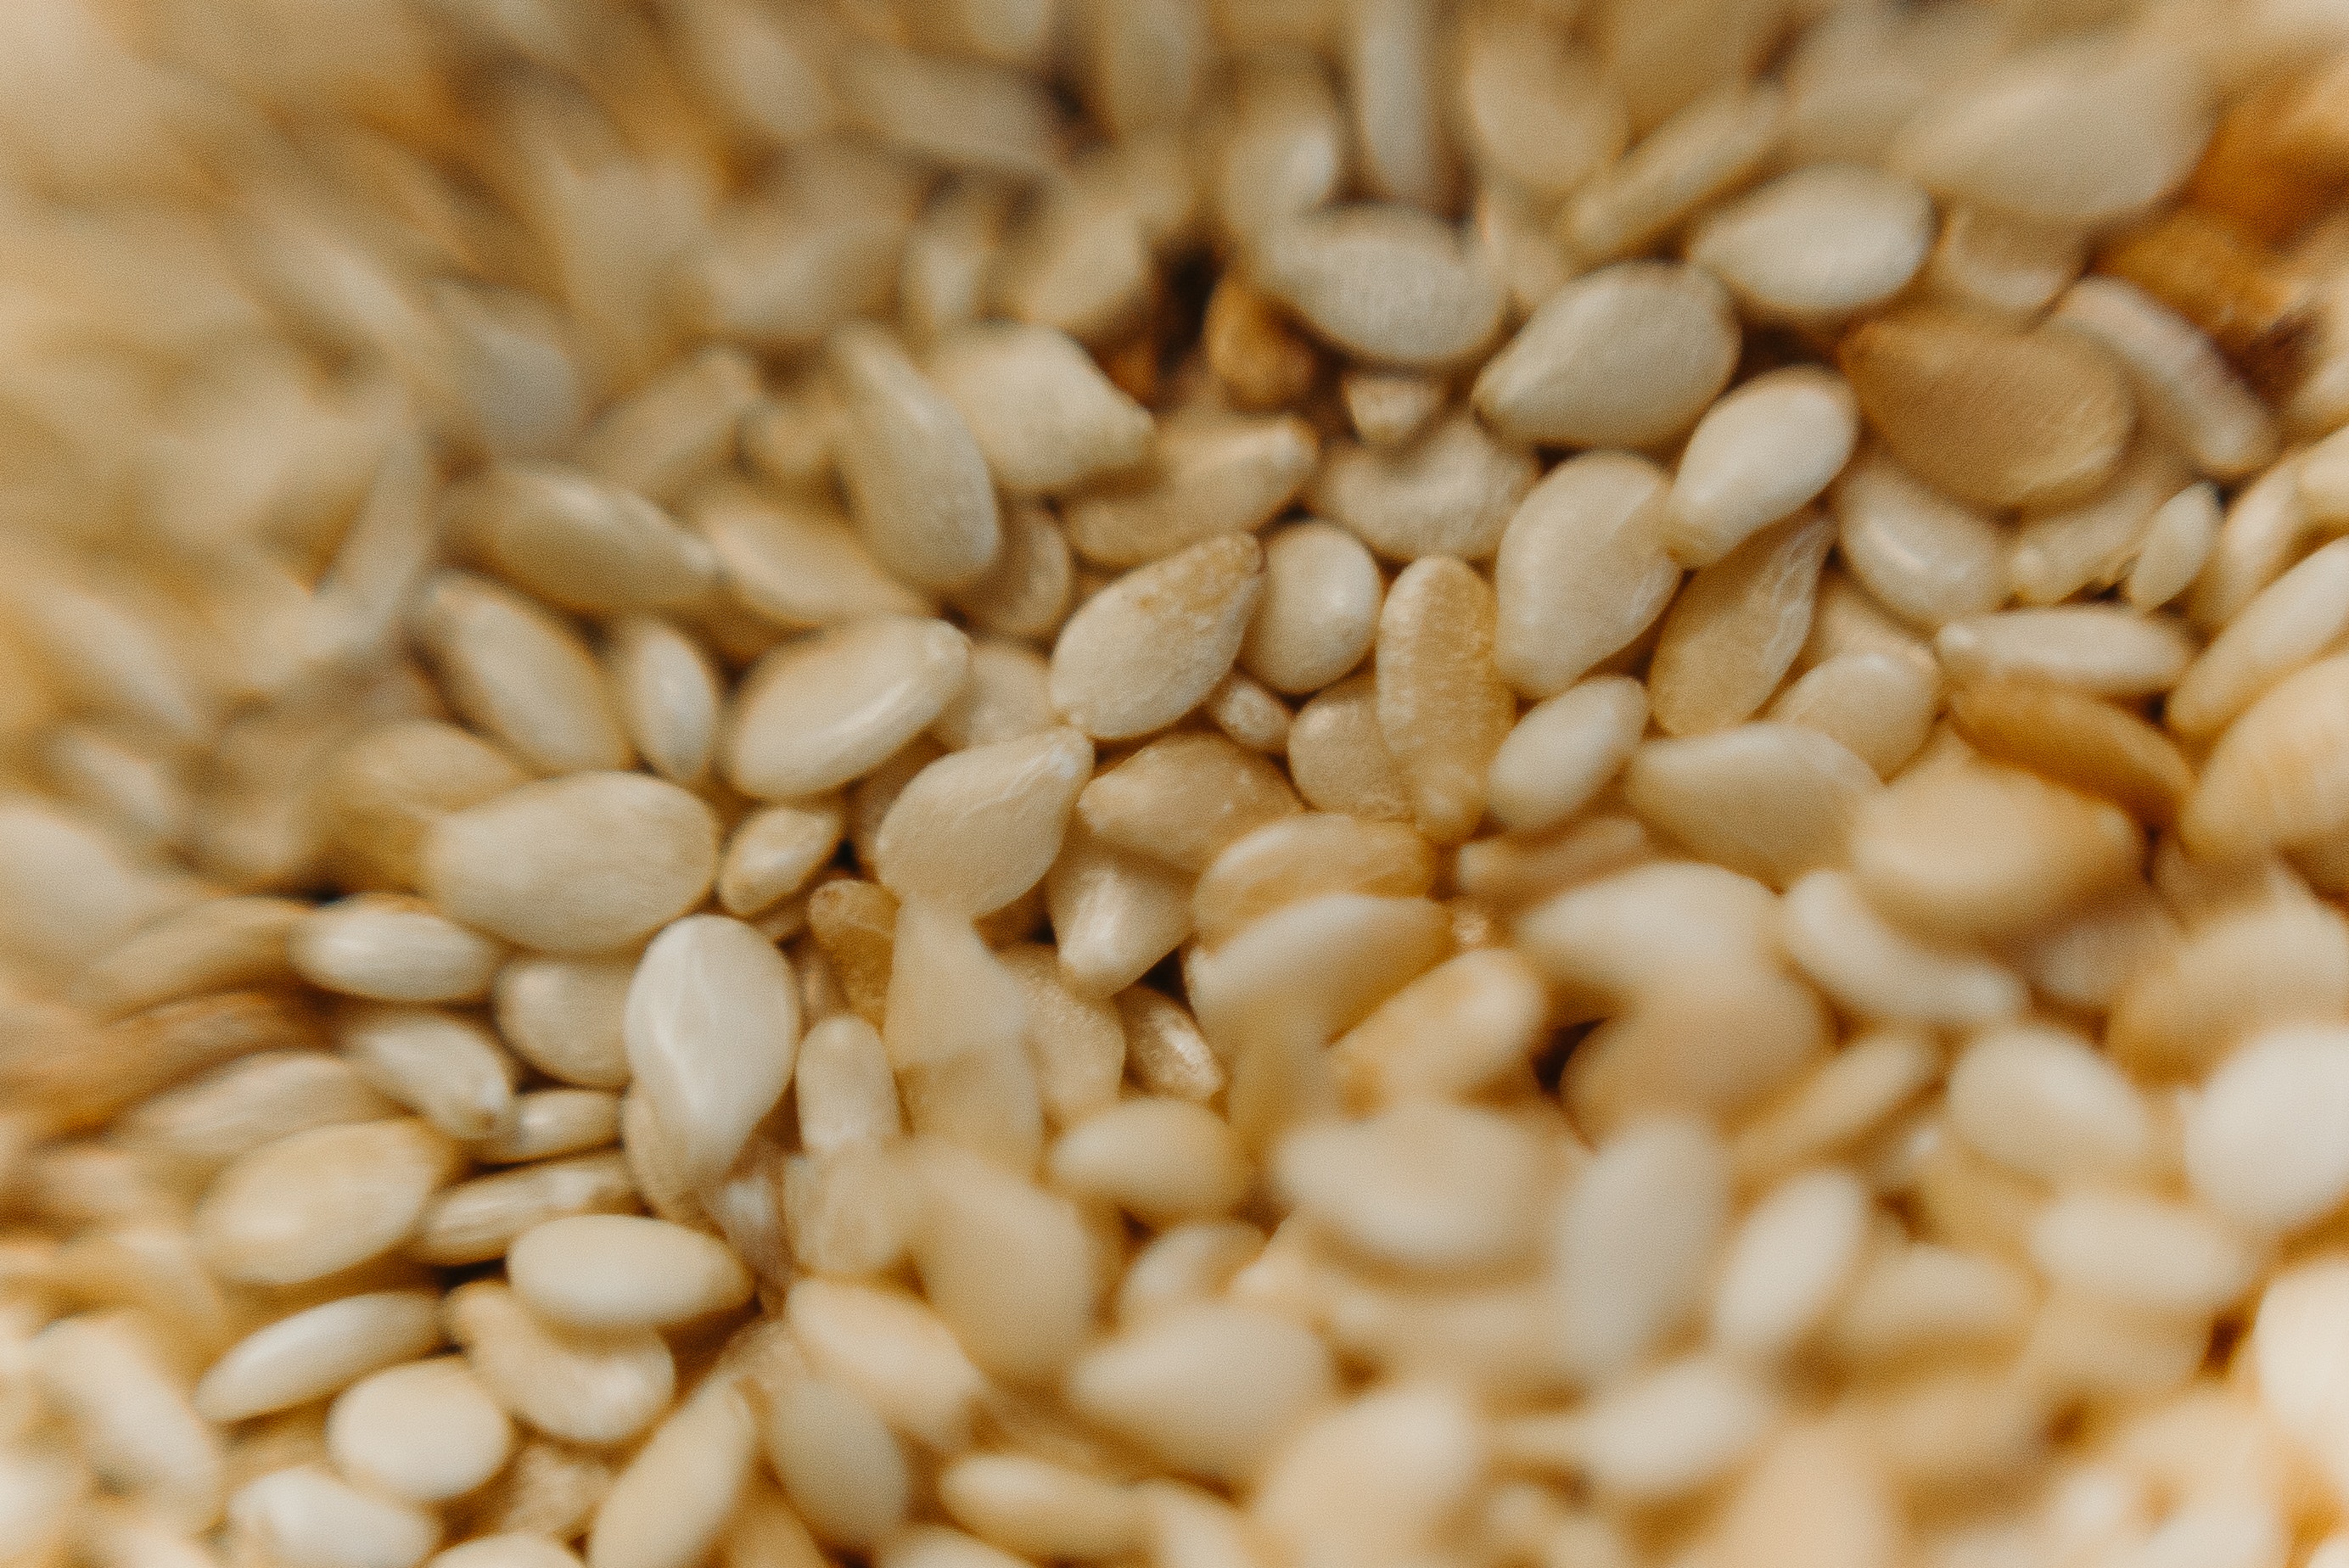 Refined Grains Are Harmful for Heart Health, Study Shows